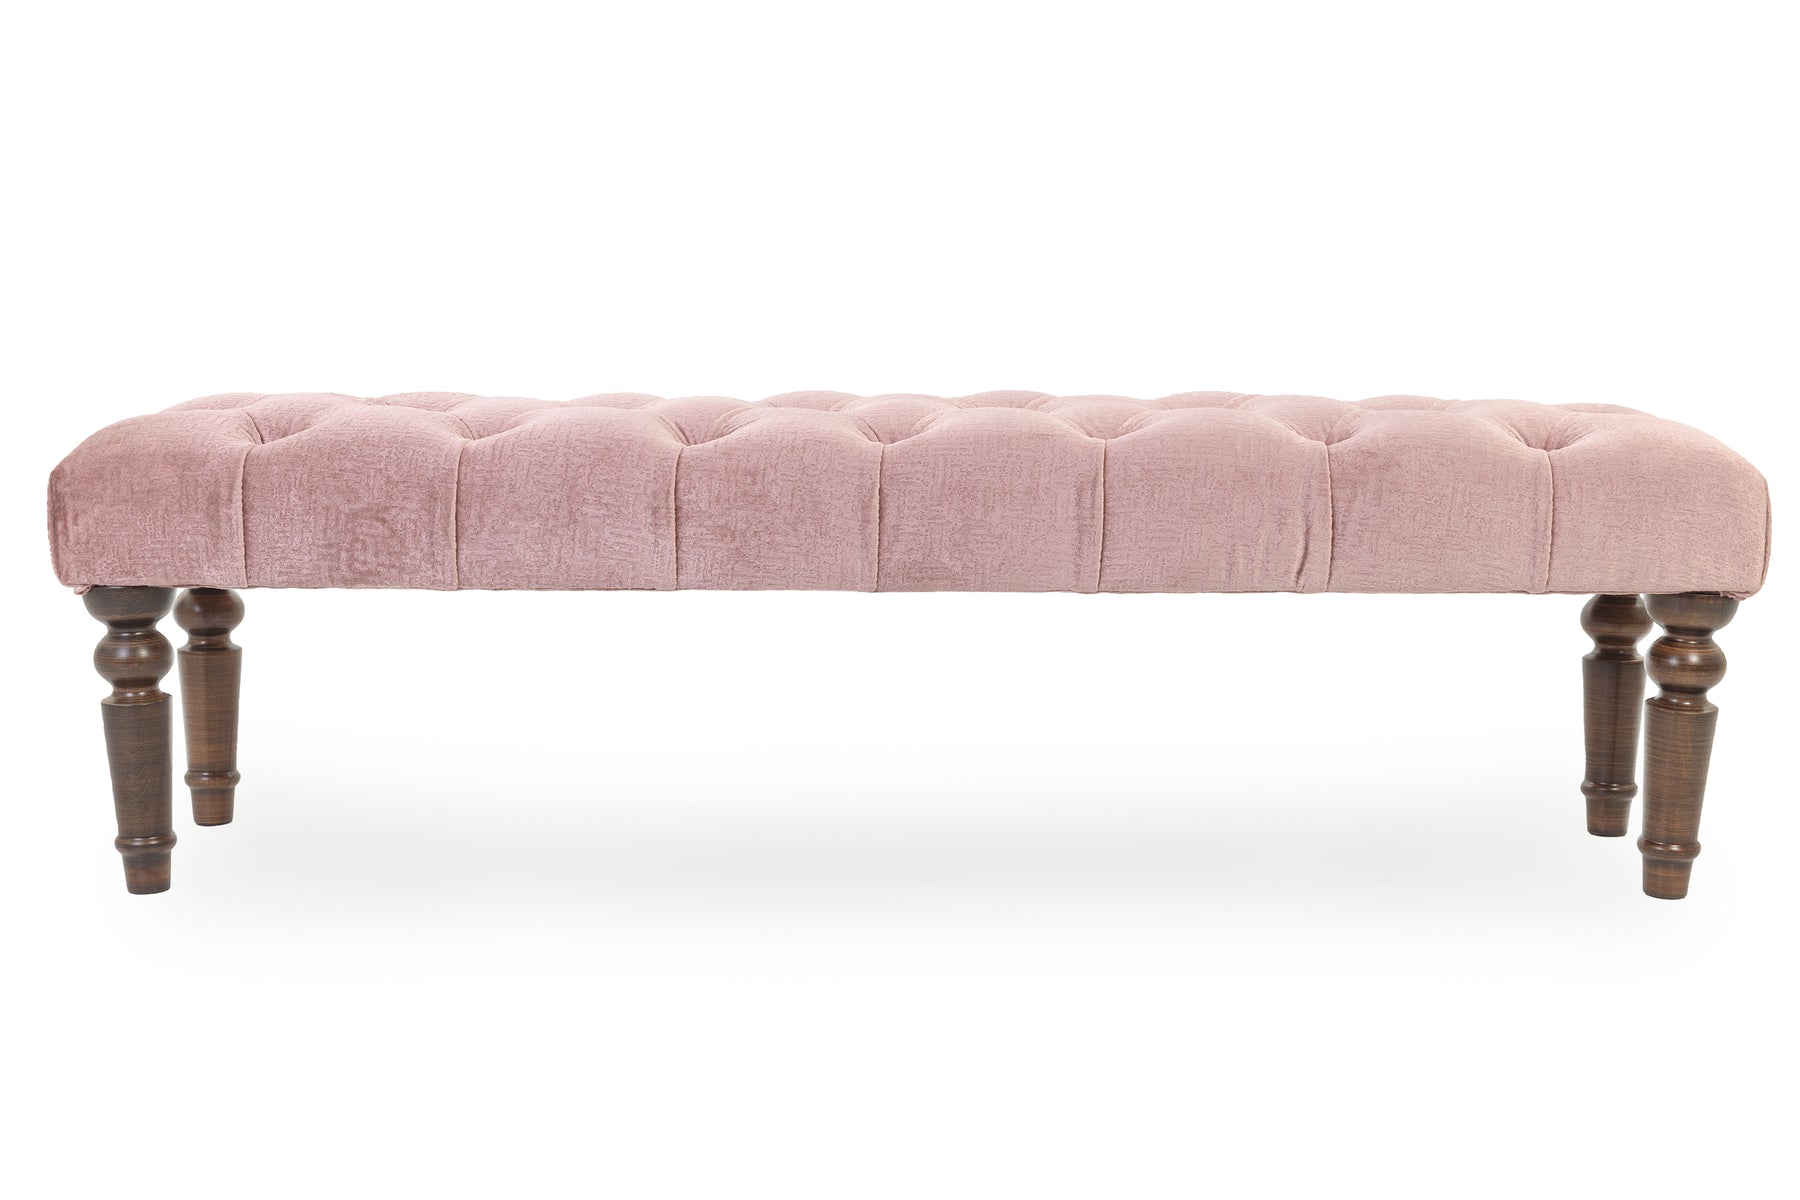 Chloe Chesterfield Upholstered Bench / Footstool